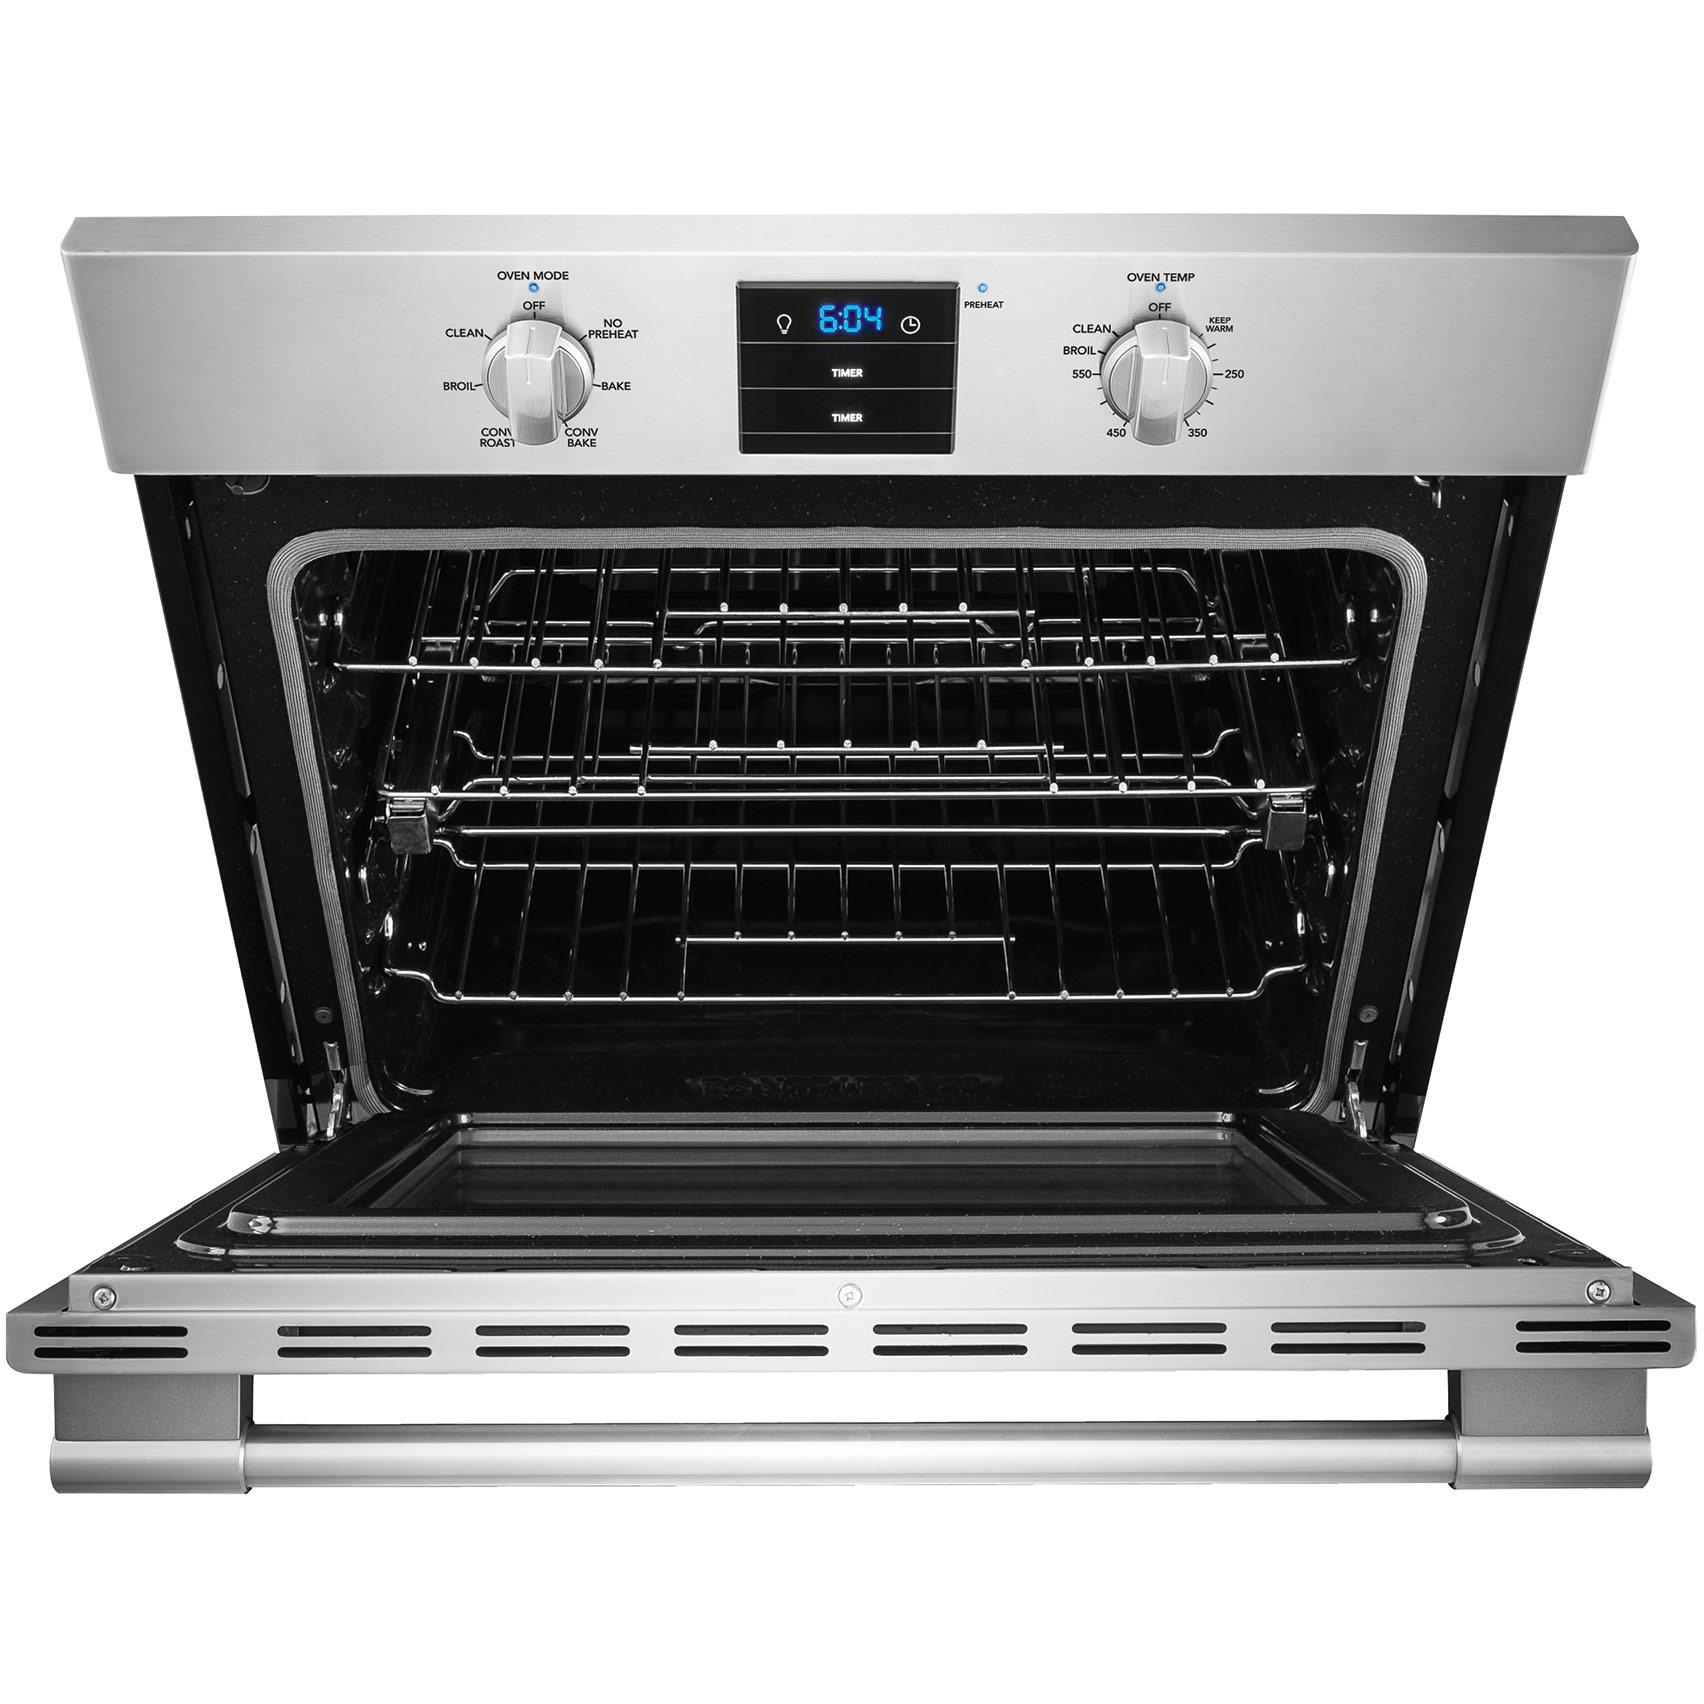 Frigidaire Professional 30-inch, 5.1 cu. ft. Built-in Single Wall Oven with Convection FPEW3077RF